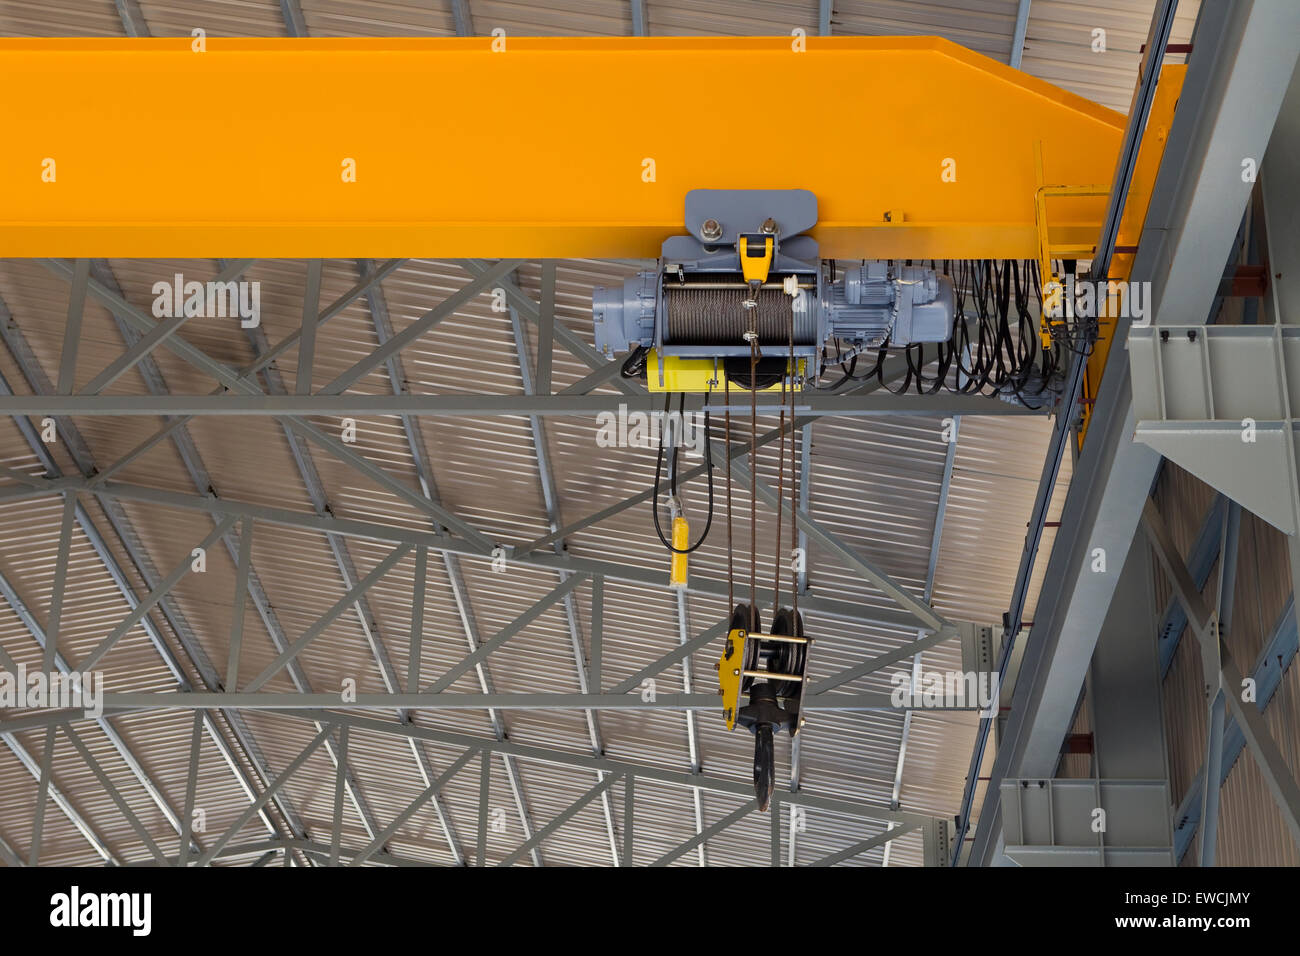 Close up of an indoor factory overhead crane on a yellow beam Stock Photo